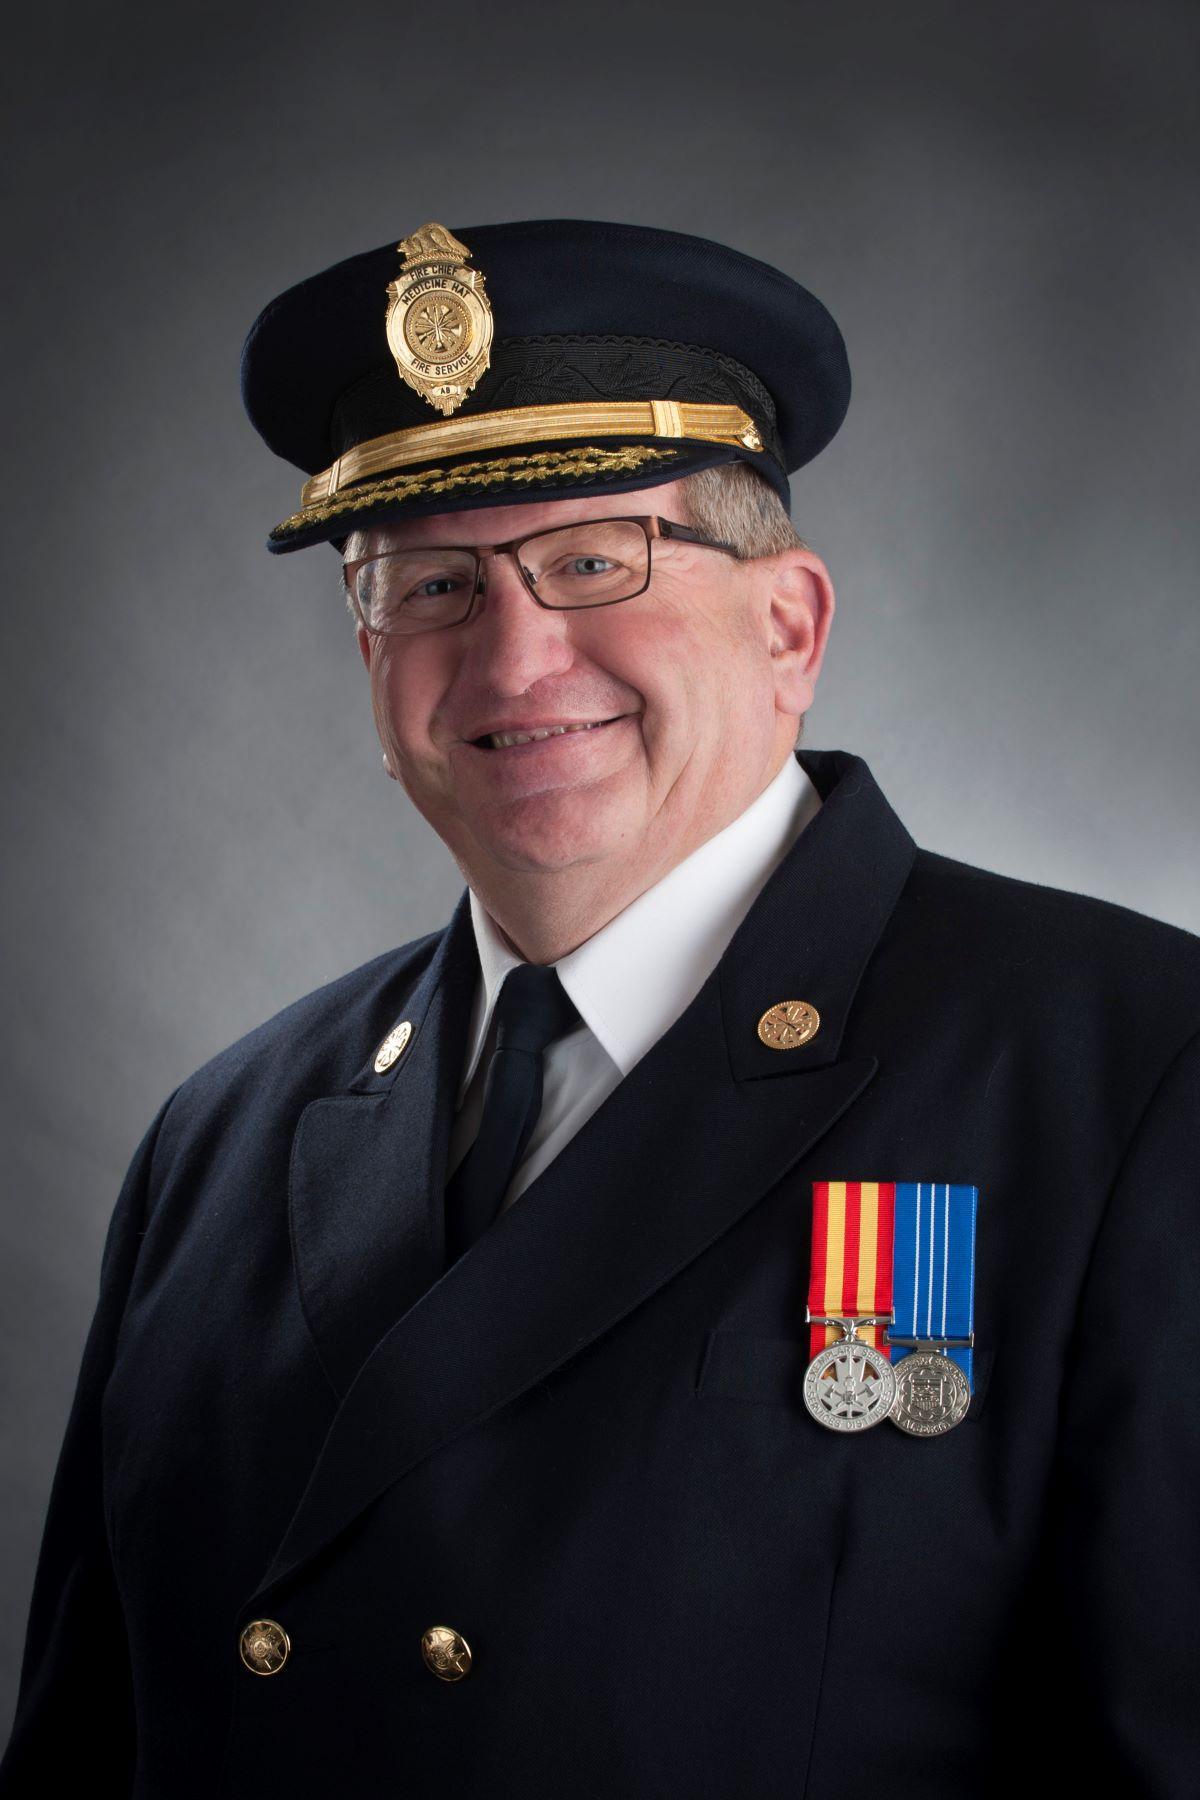 Chief Brian Stauth